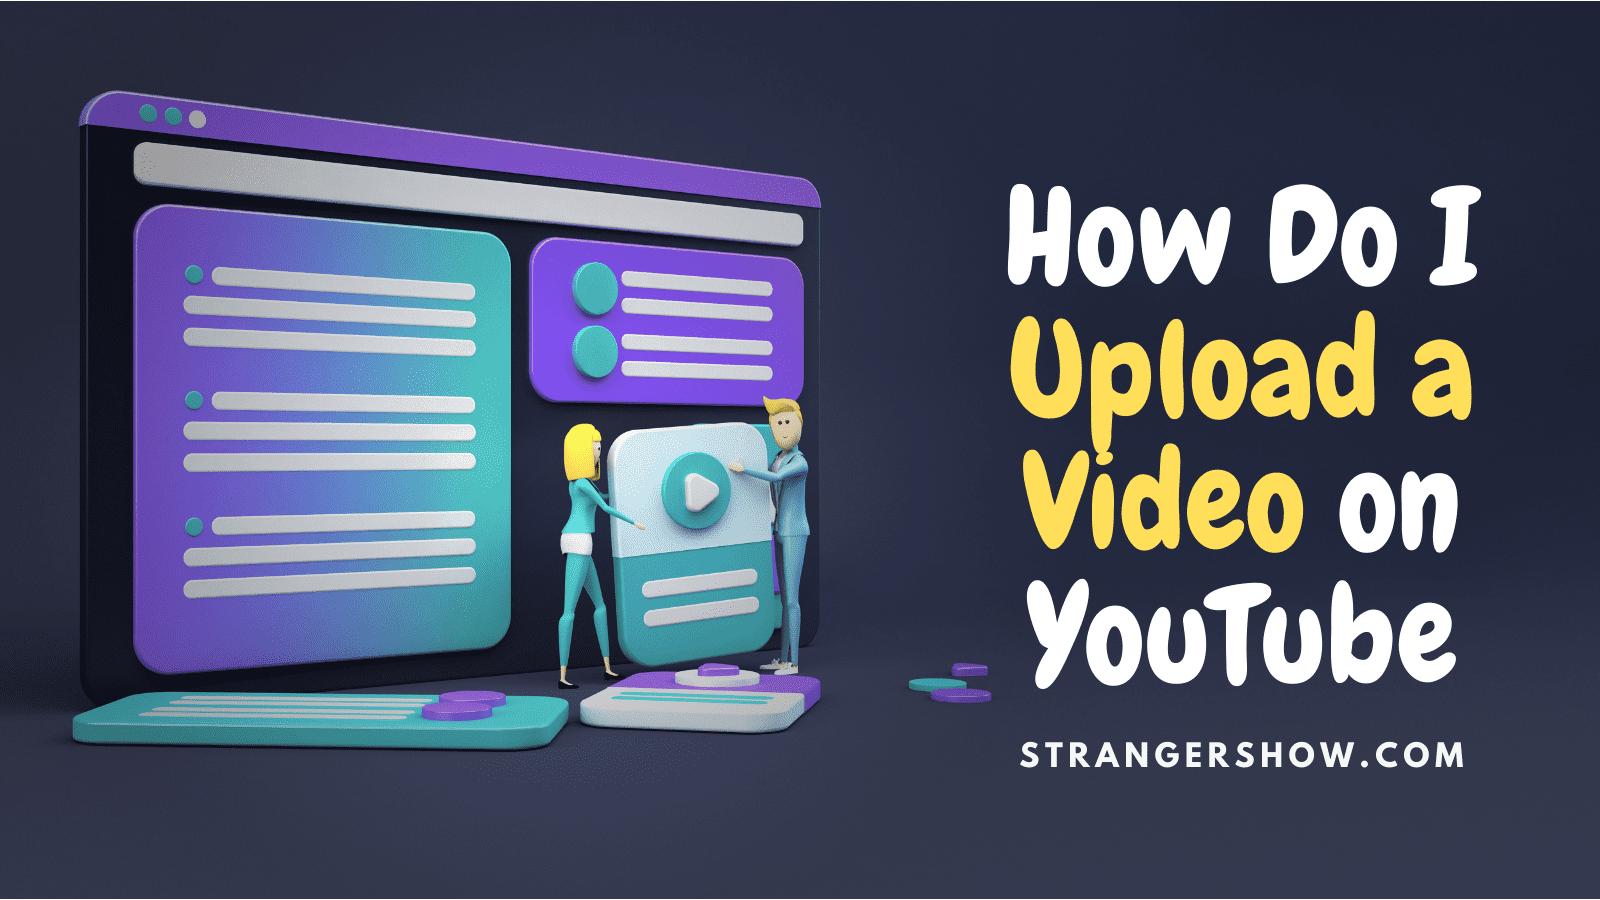 How do I upload a video on YouTube Step by step guide